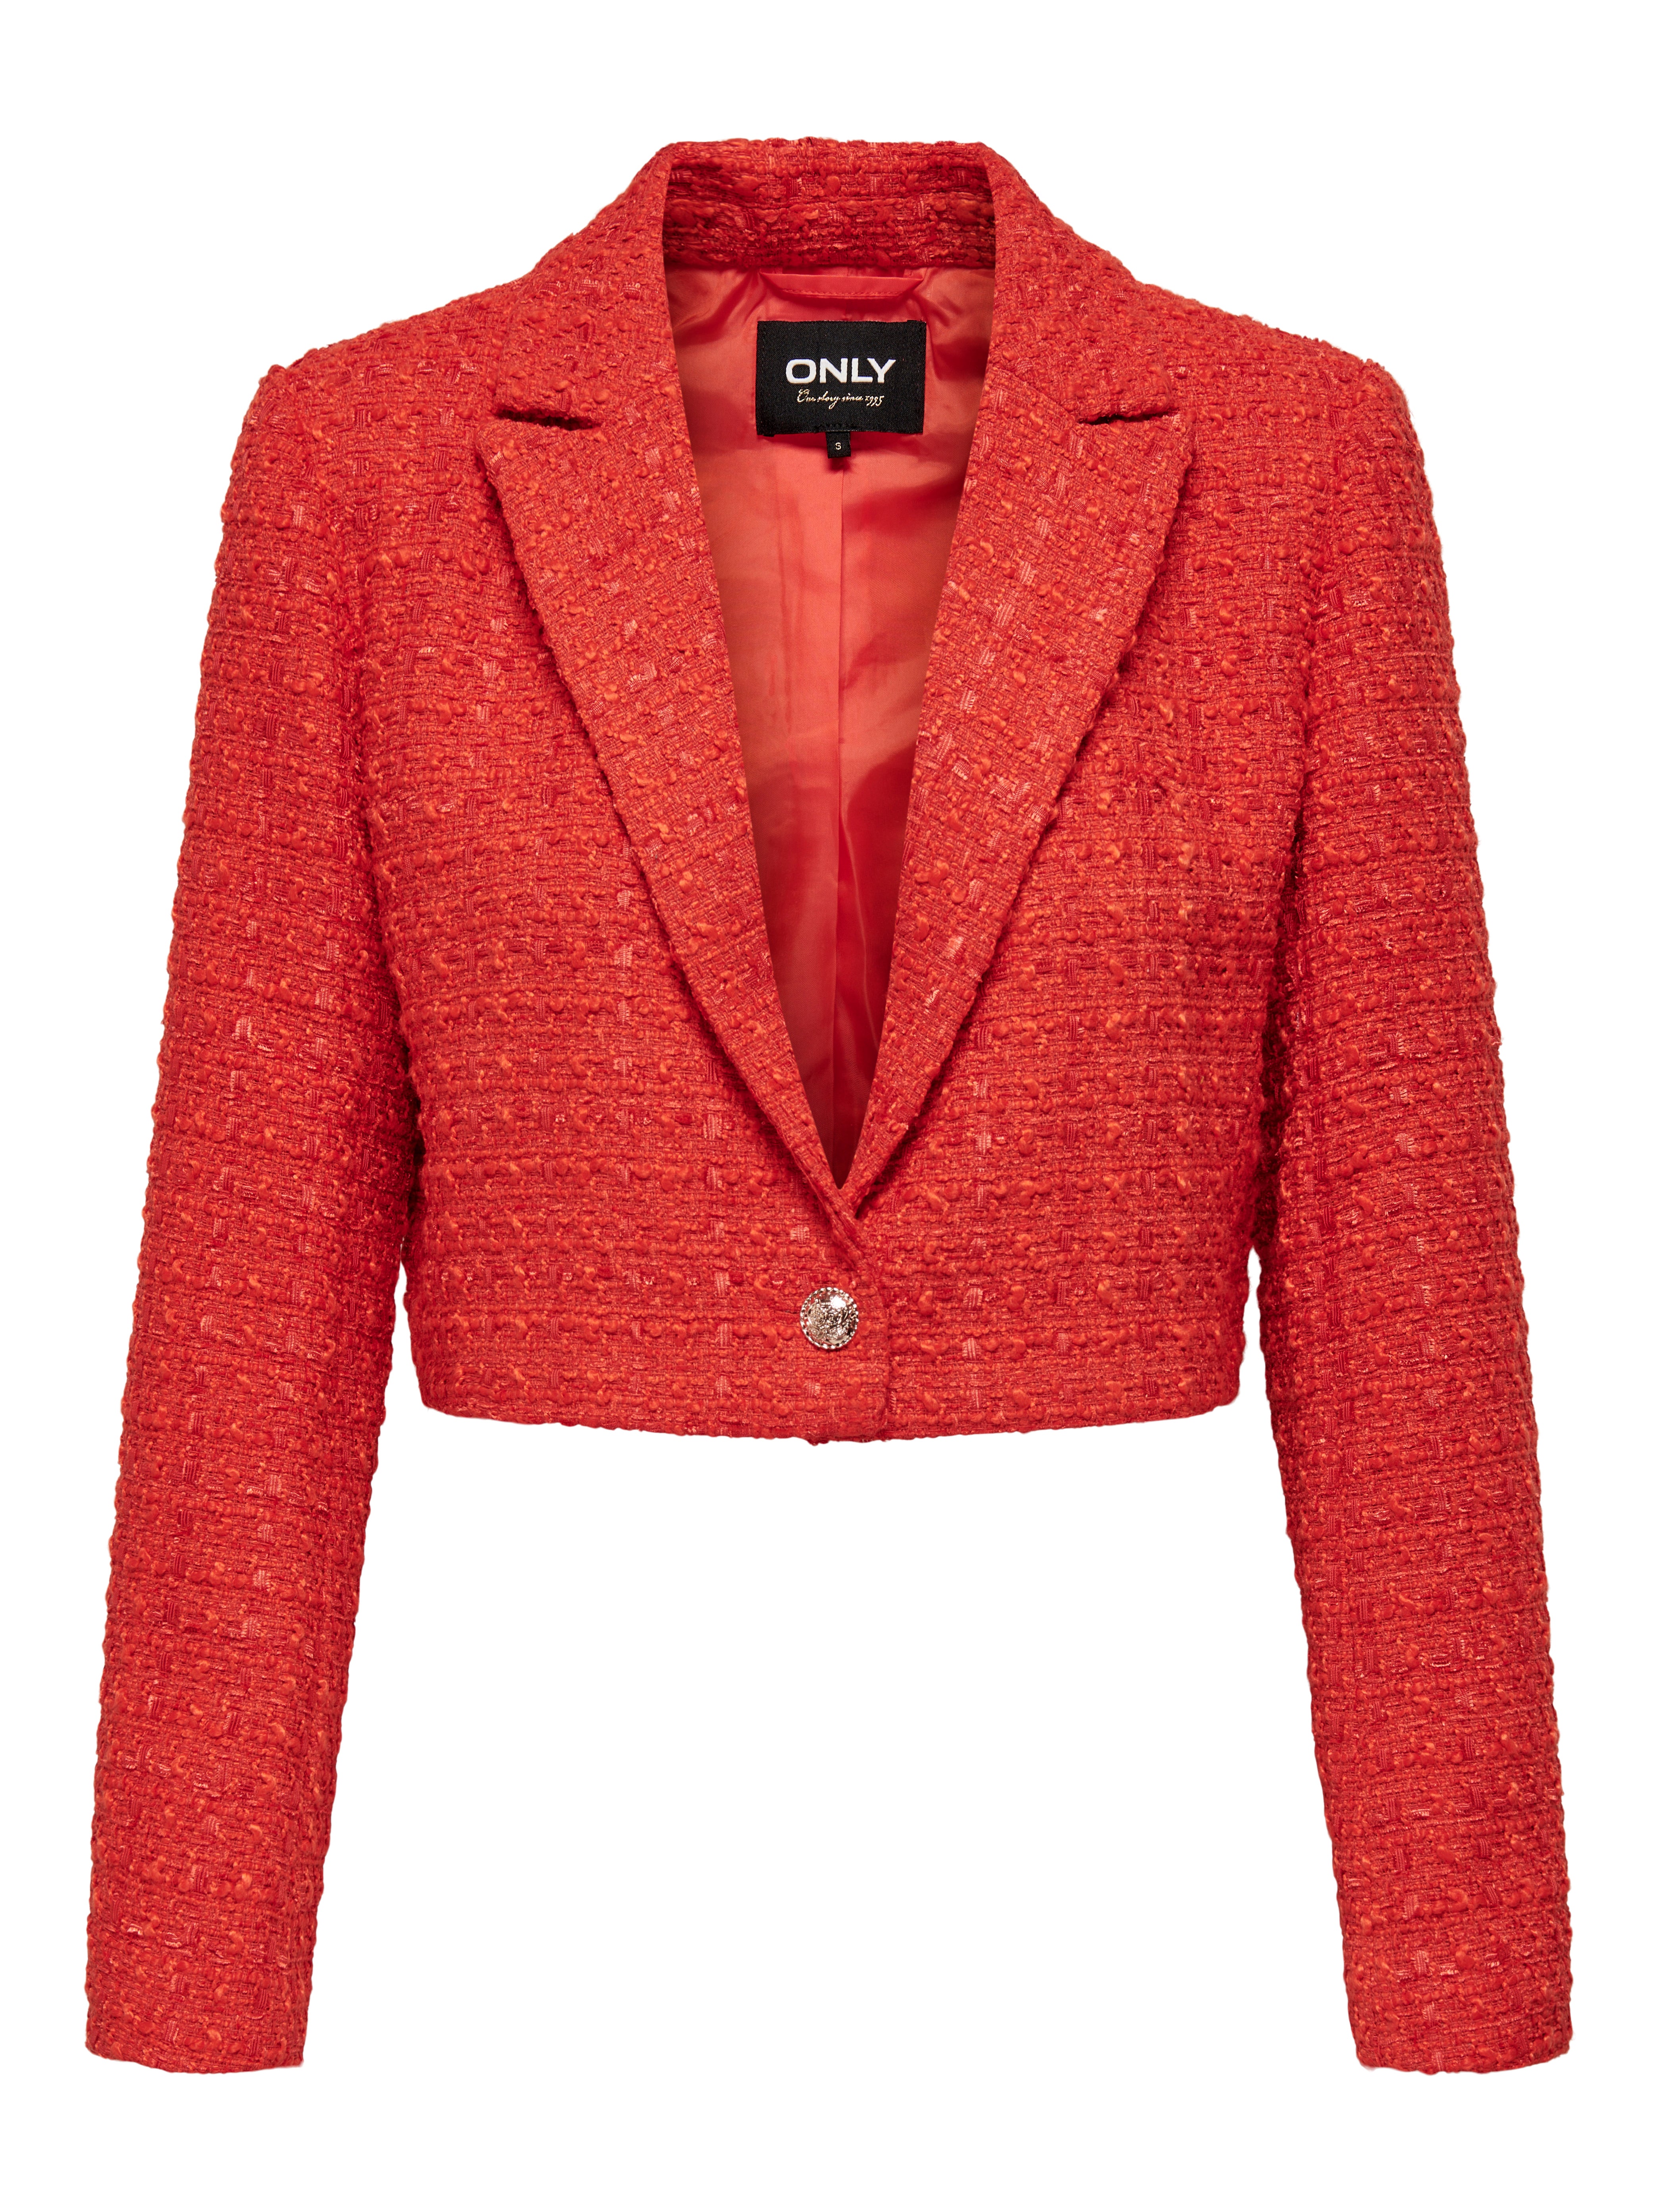 Ready for Takeoff Blazer in Red (Online Exclusive)